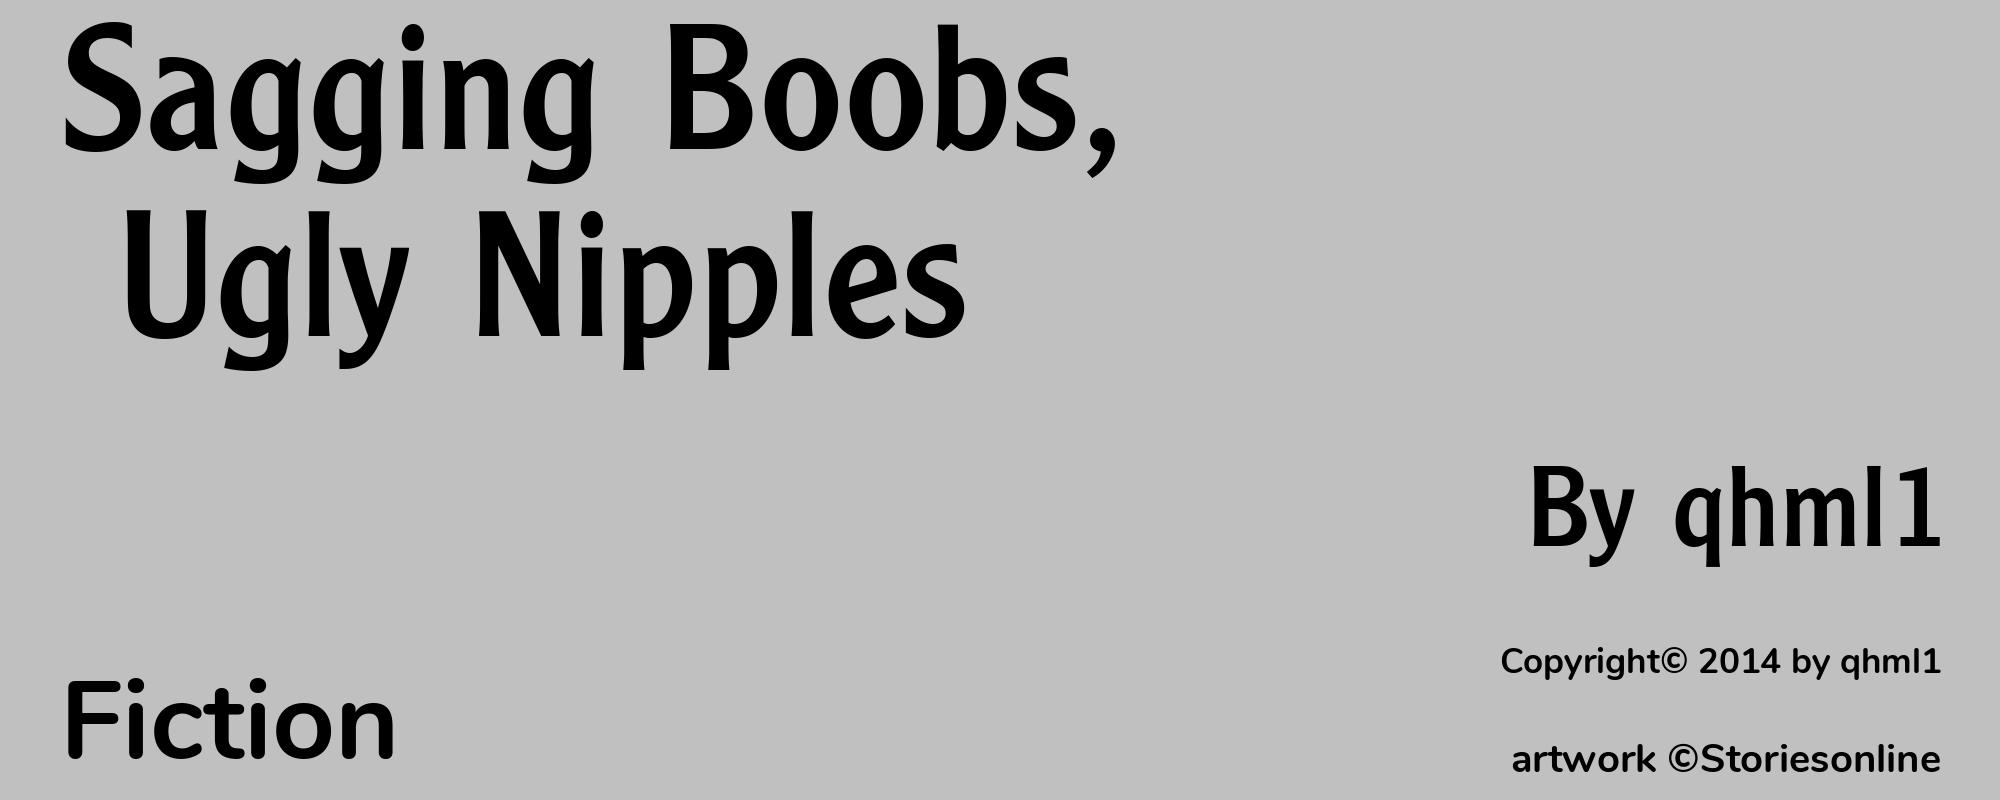 Sagging Boobs, Ugly Nipples - Cover